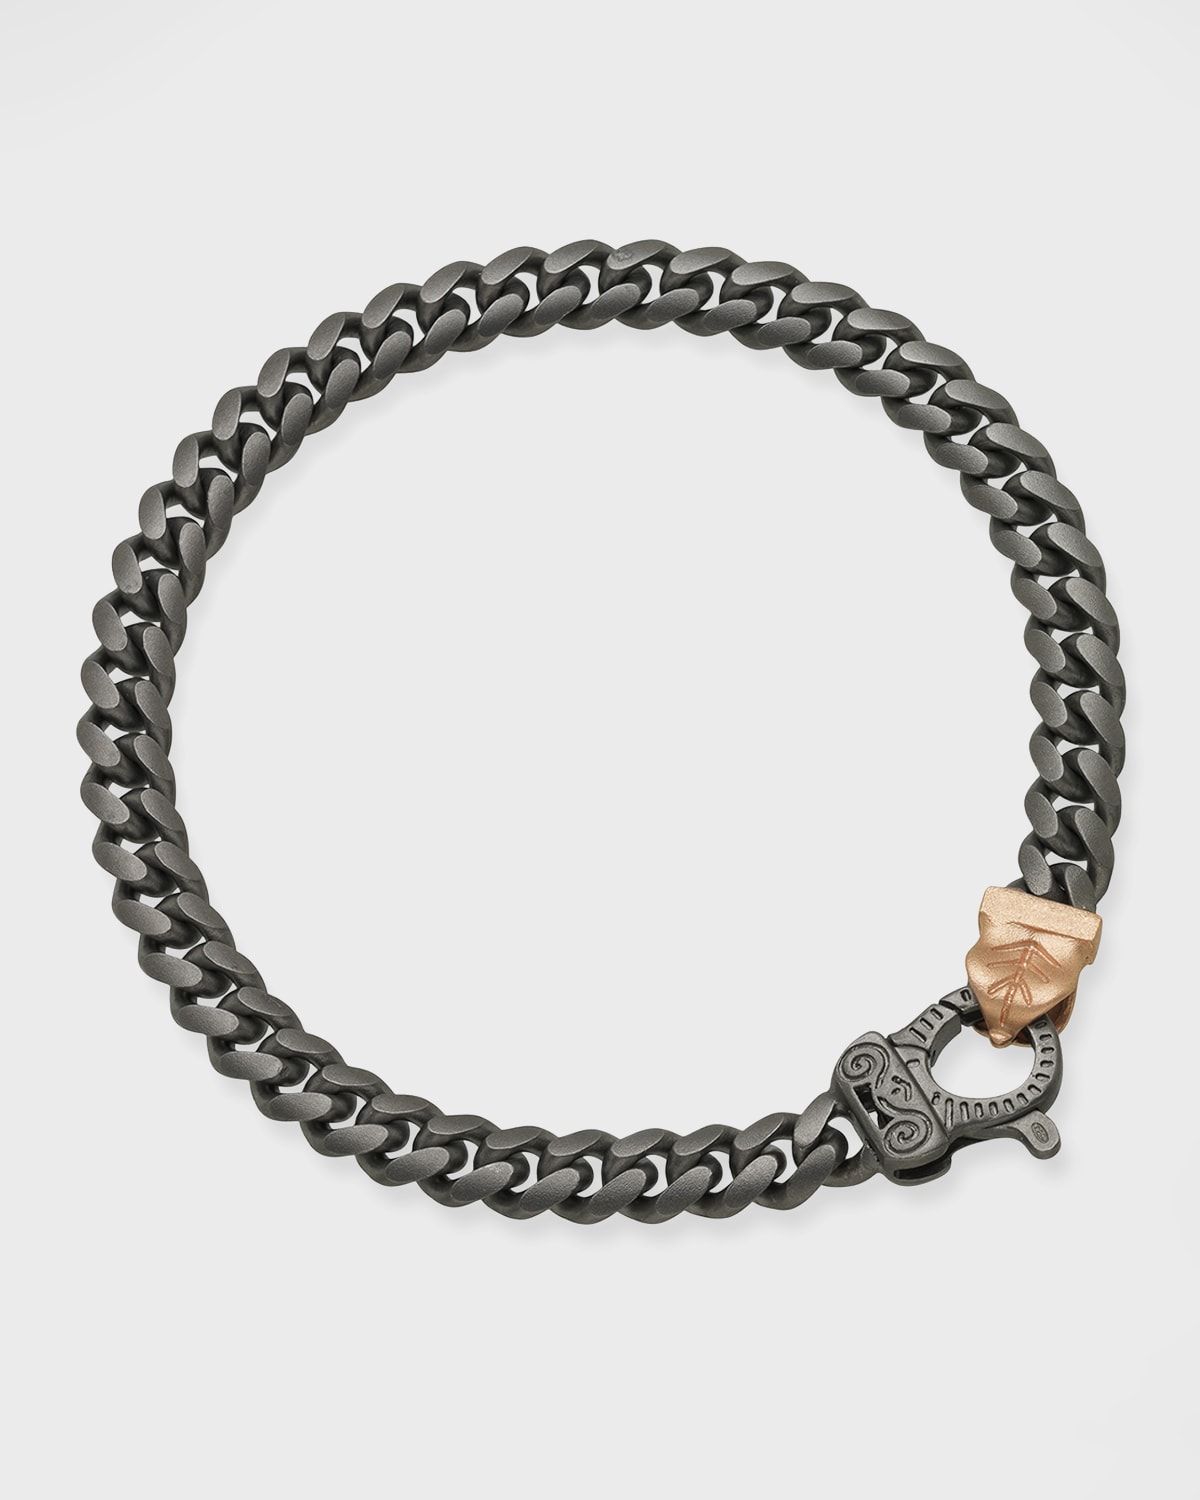 Flaming Tongue Thin Link Bracelet, Silver and Rose Gold